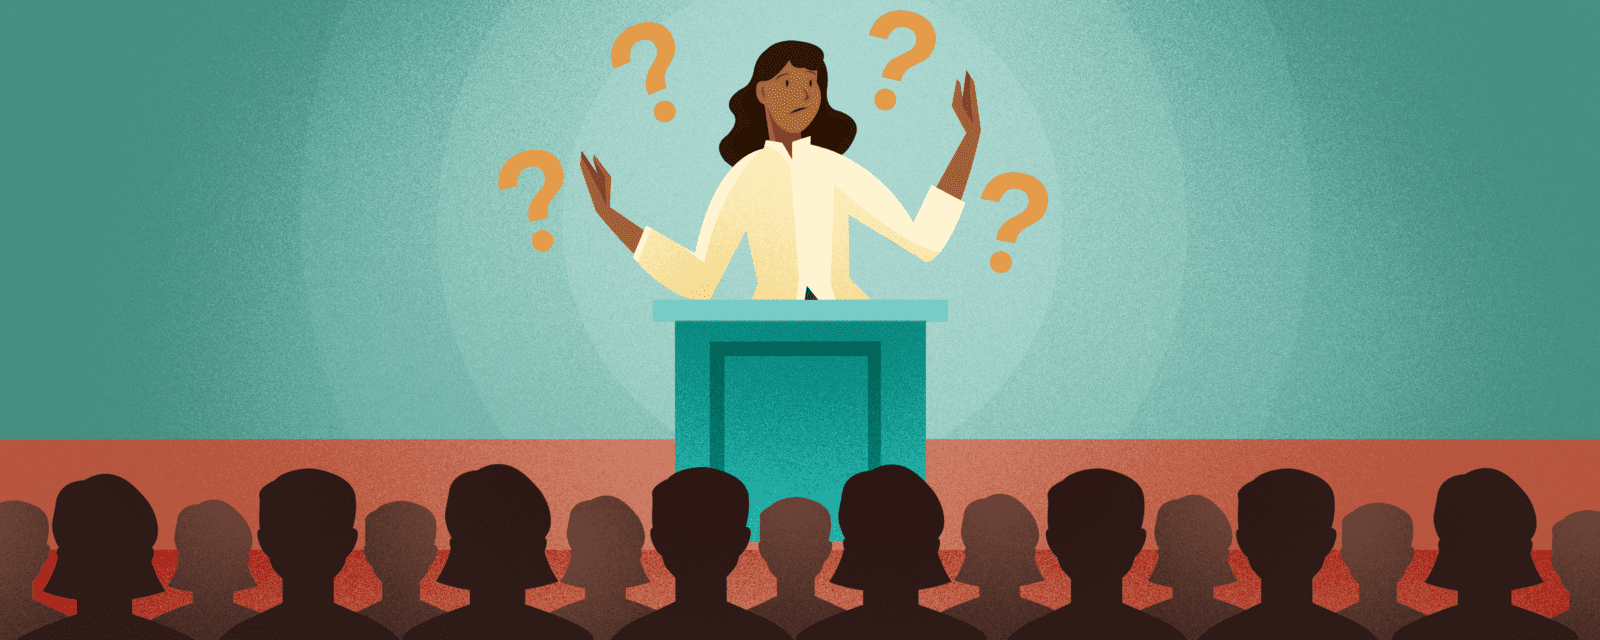 Woman standing at a podium, giving a presentation to an audience. Question mark icons hover around her head